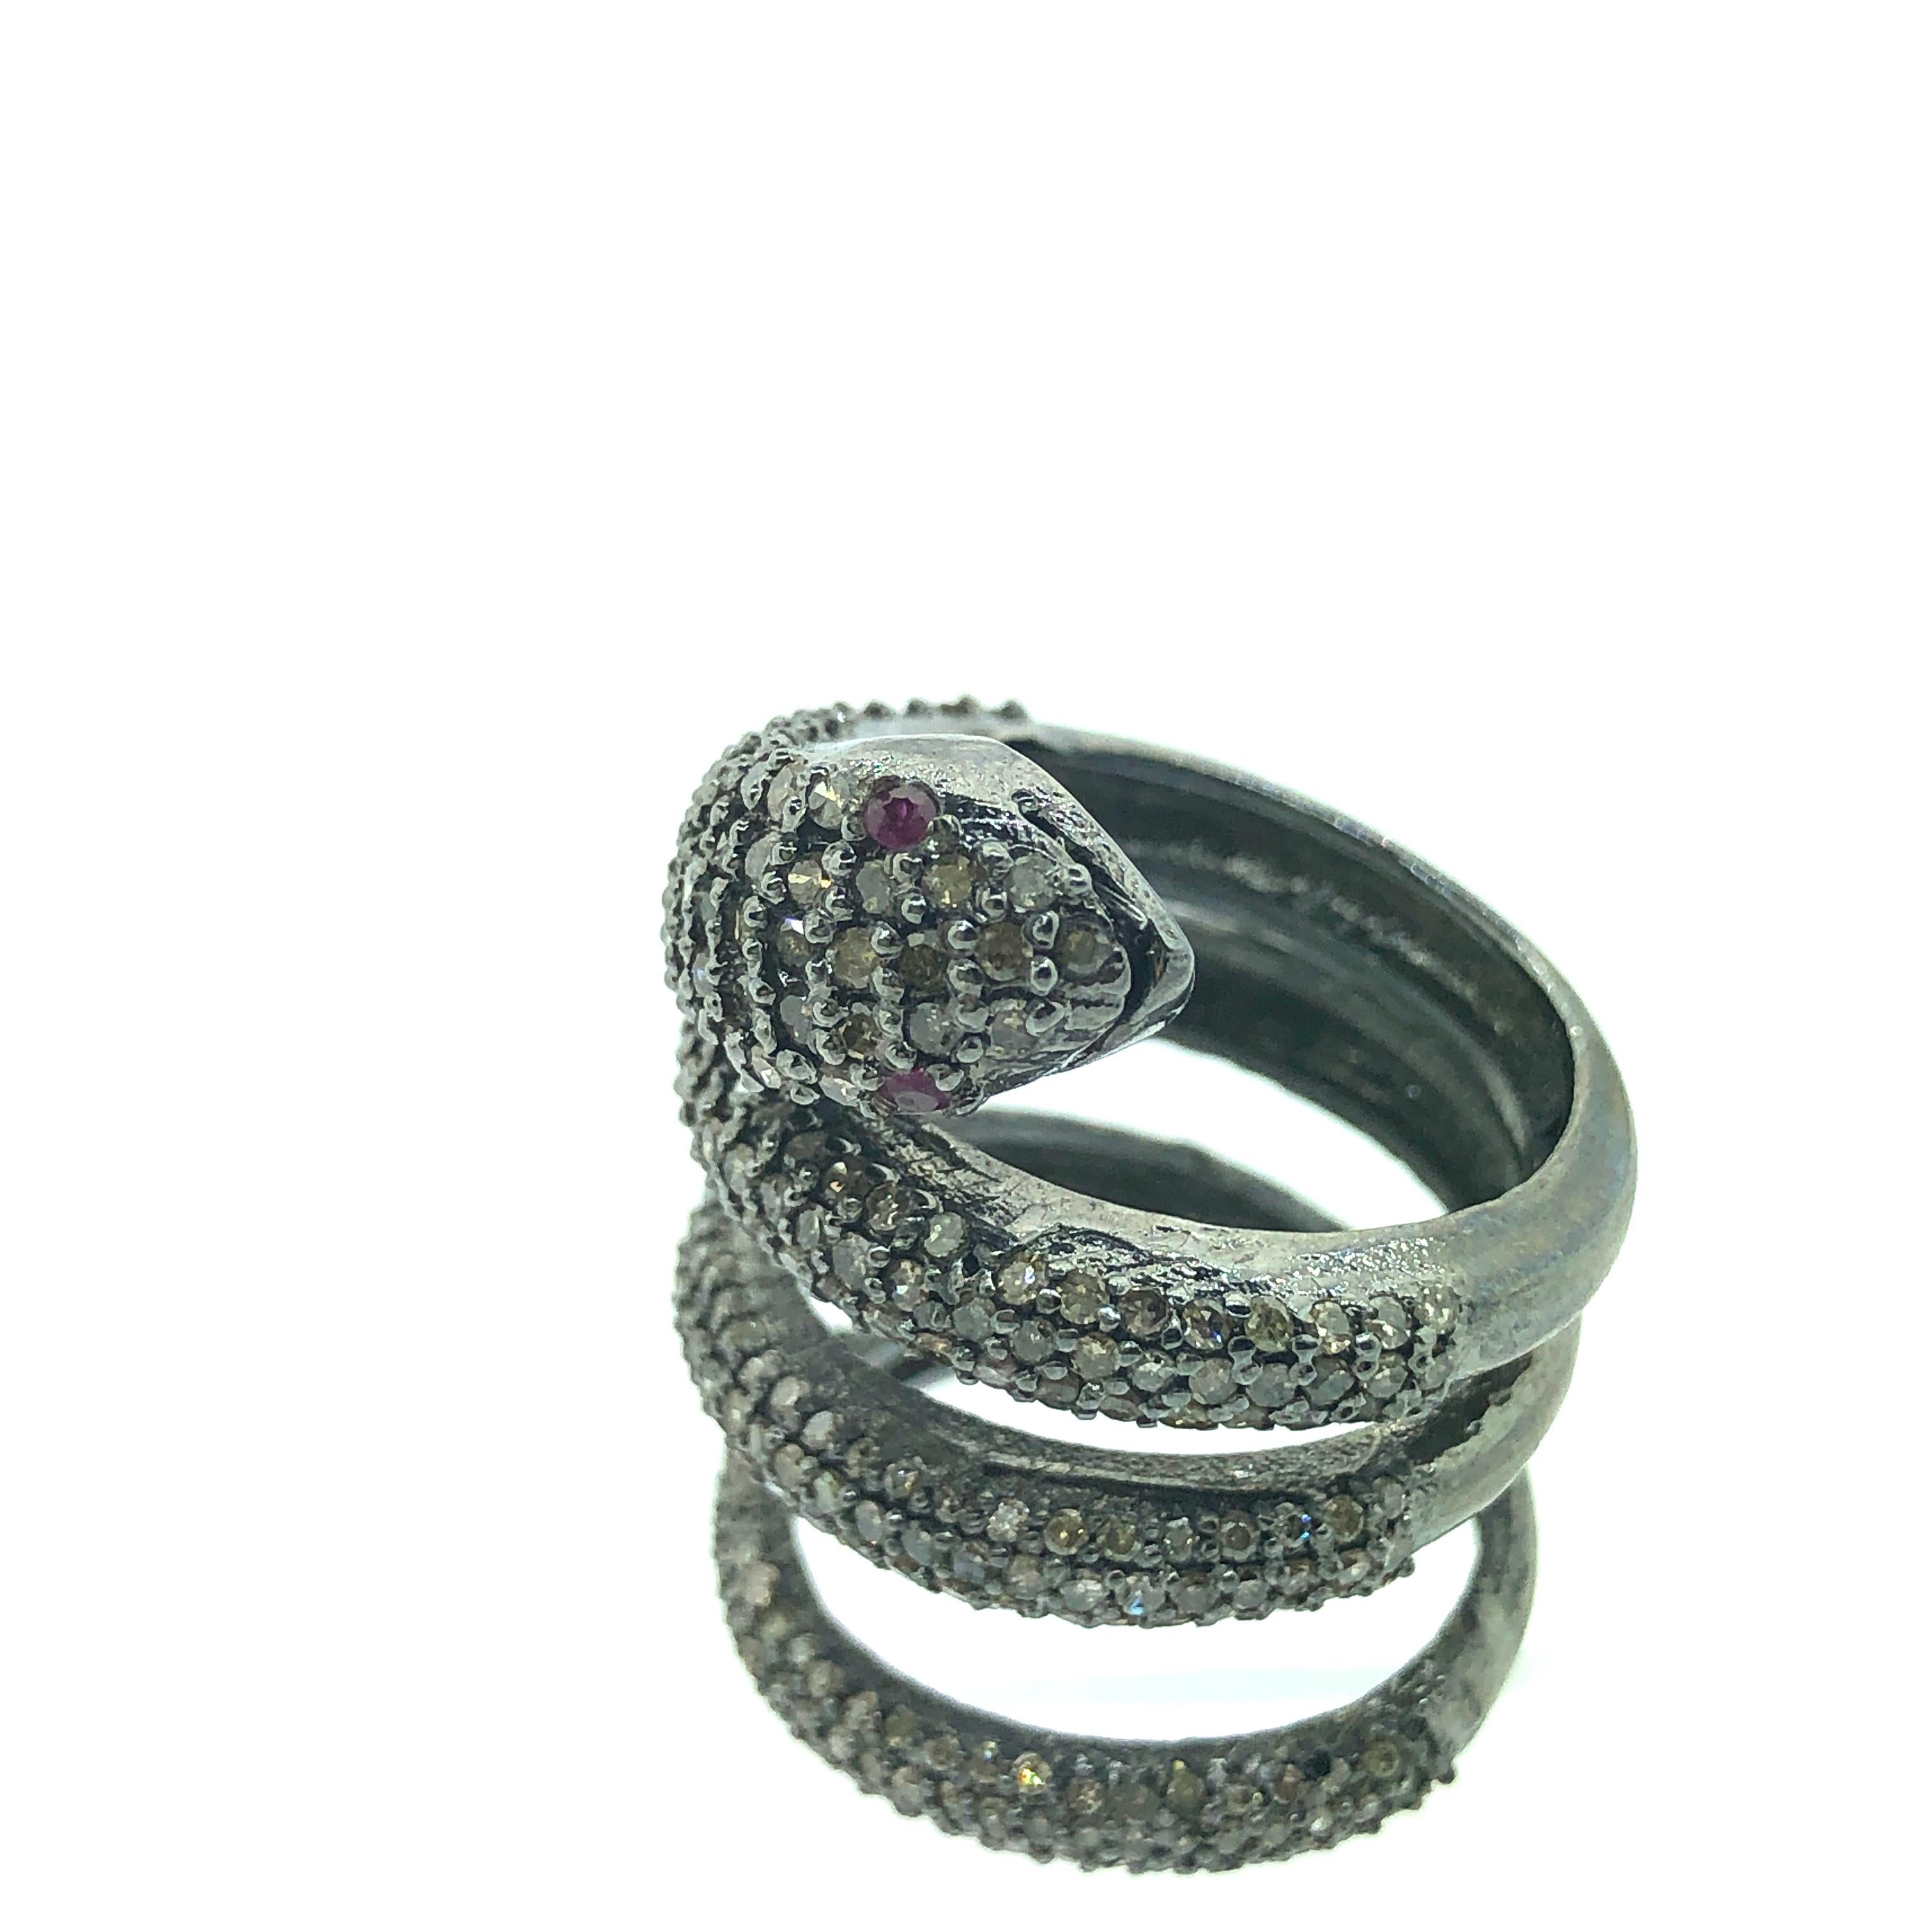 2.88 Carat Diamond and Ruby Eyes Snake Ring in Oxidized Sterling Silver For Sale 1